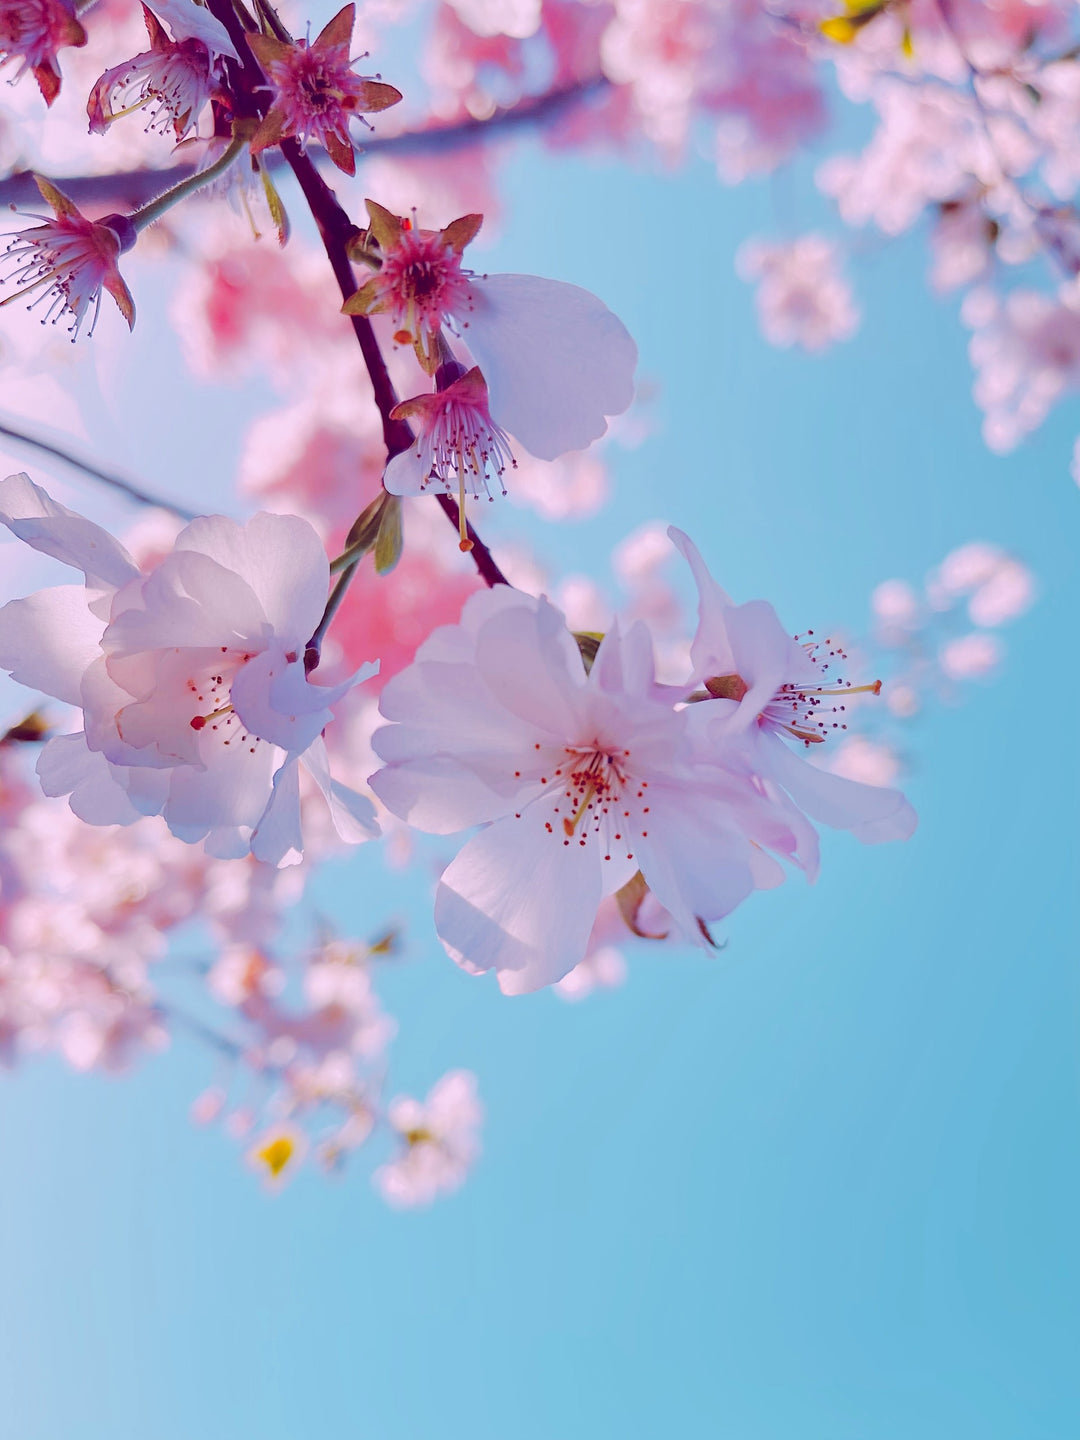 Pink cherry blossoms in bloom against a light blue sky